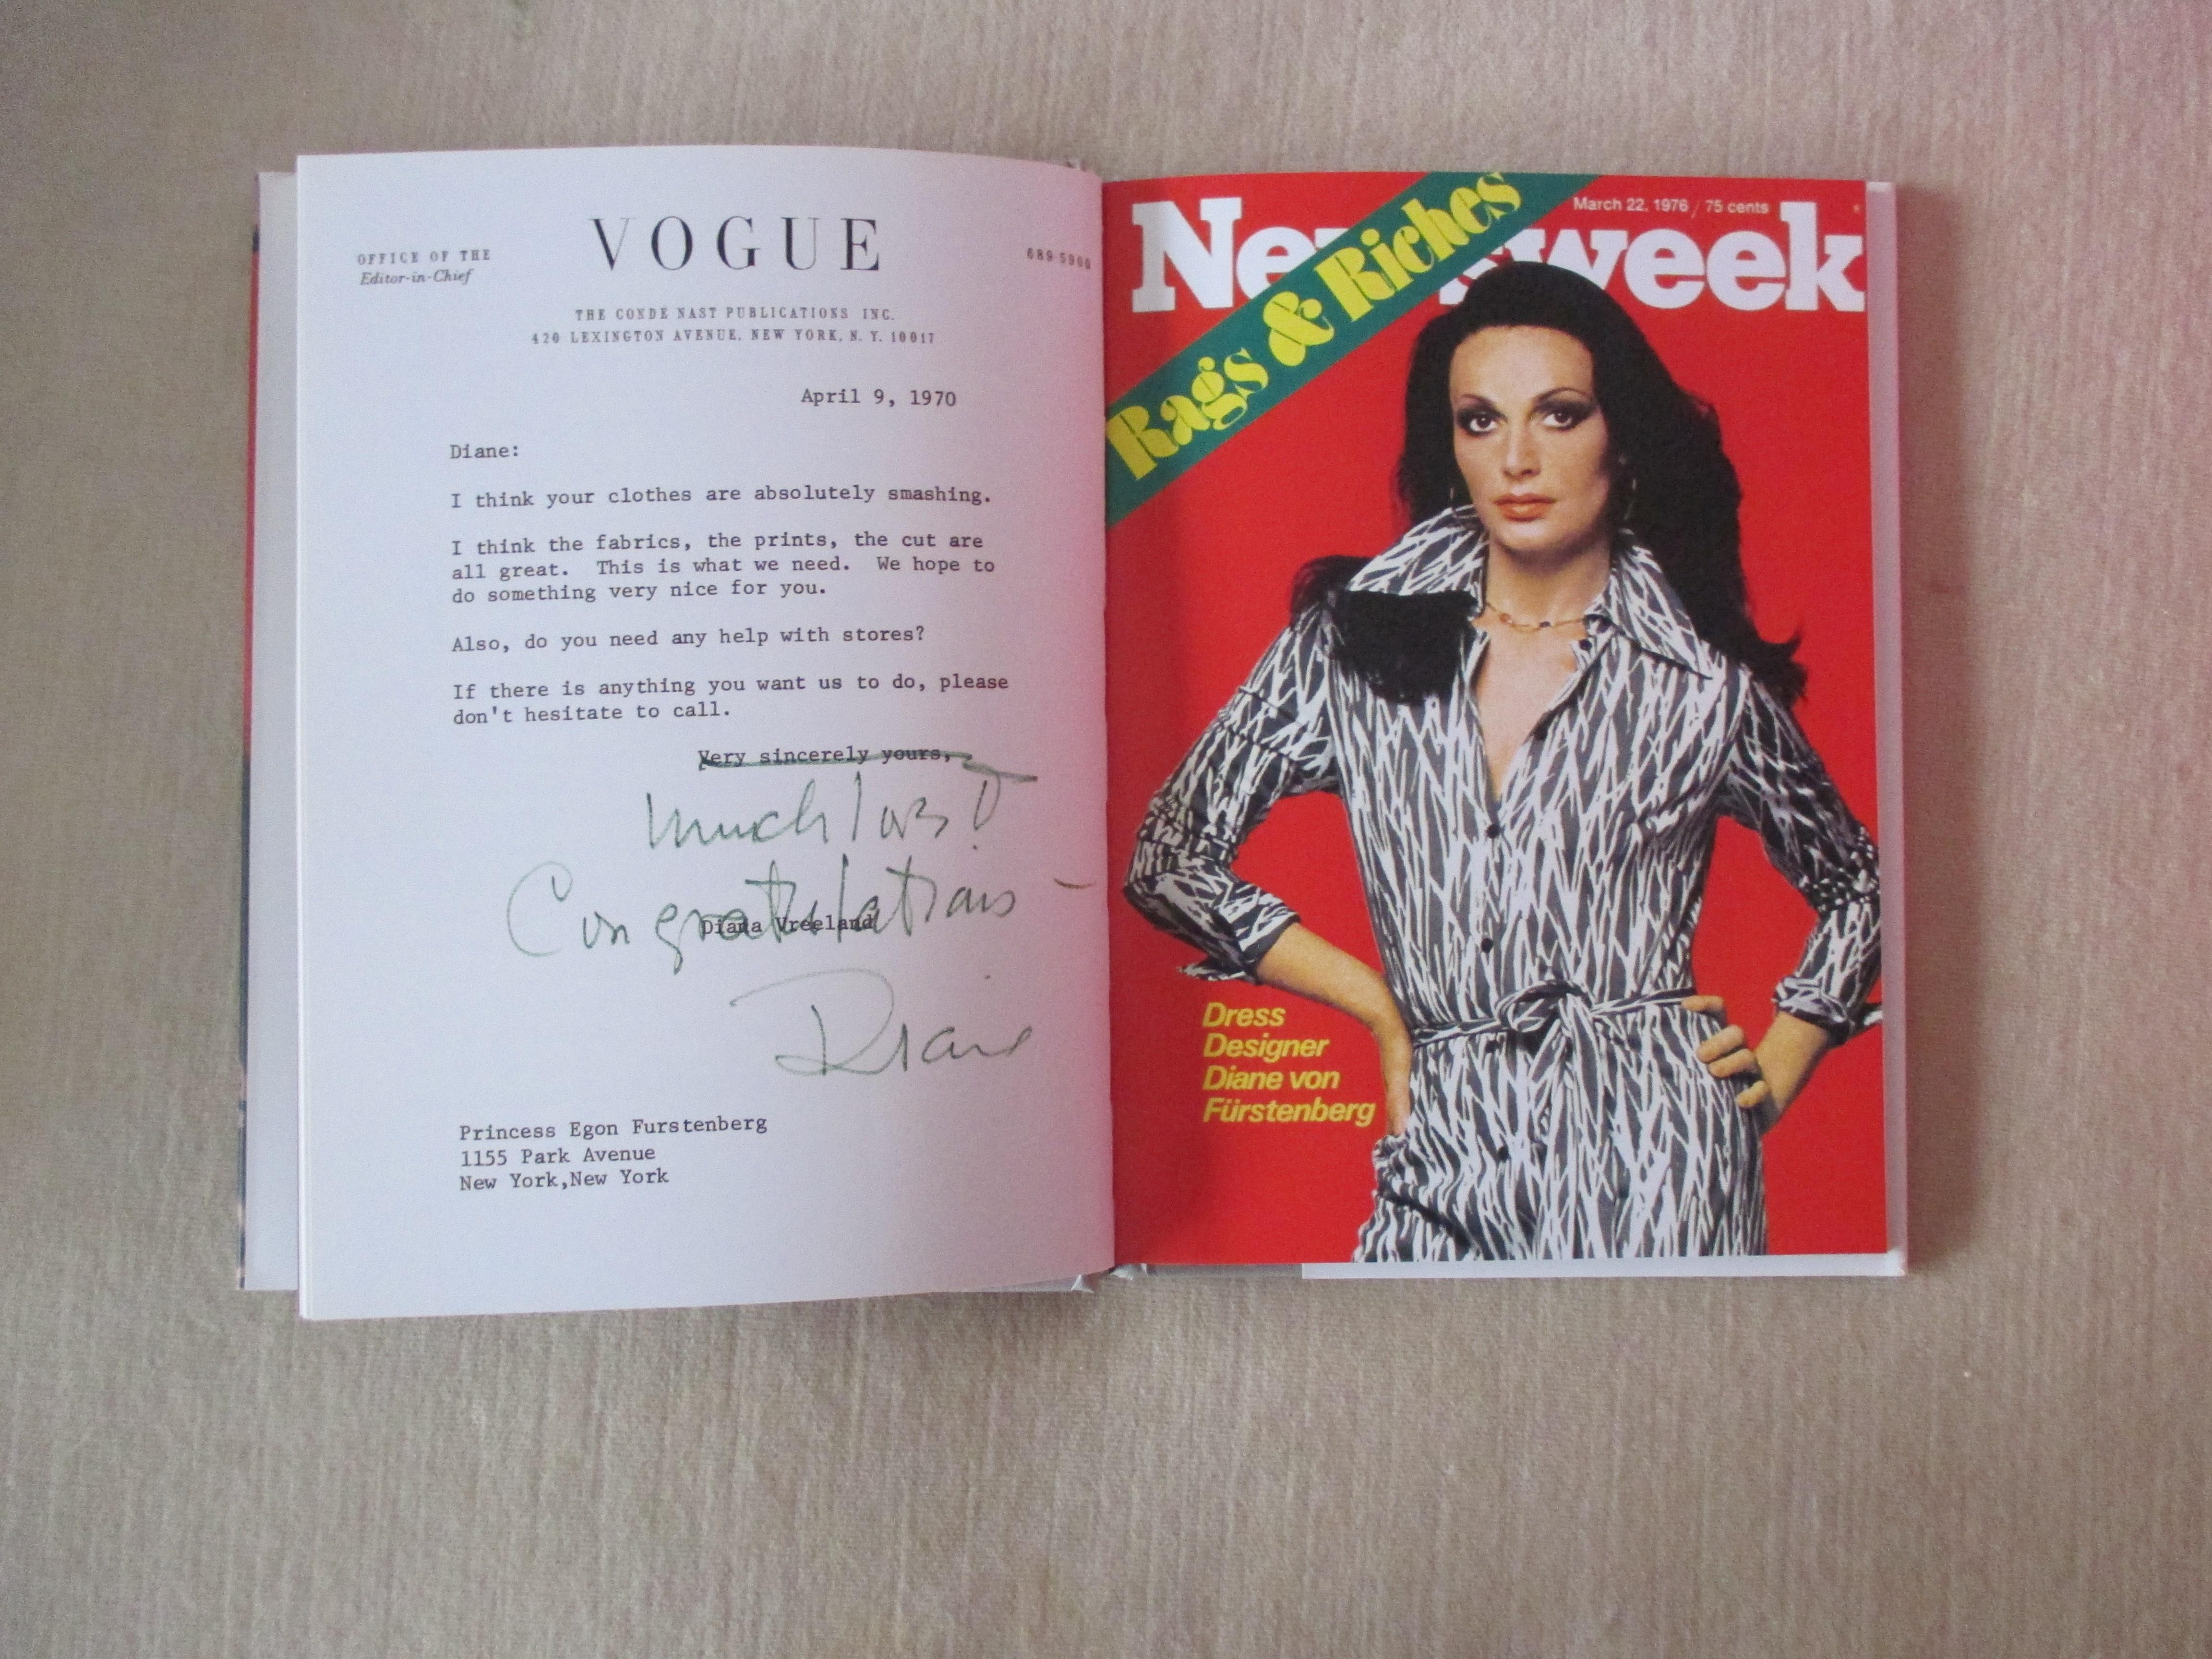 Vintage Diane Von Furstenberg book: The Wrap
Diane von Furstenberg arrived in the fashion world in 1972 with her simple knit jersey wrap dresses. By 1976, Diane had sold more than 5 million of her signature wrap dresses, which had come to symbolize